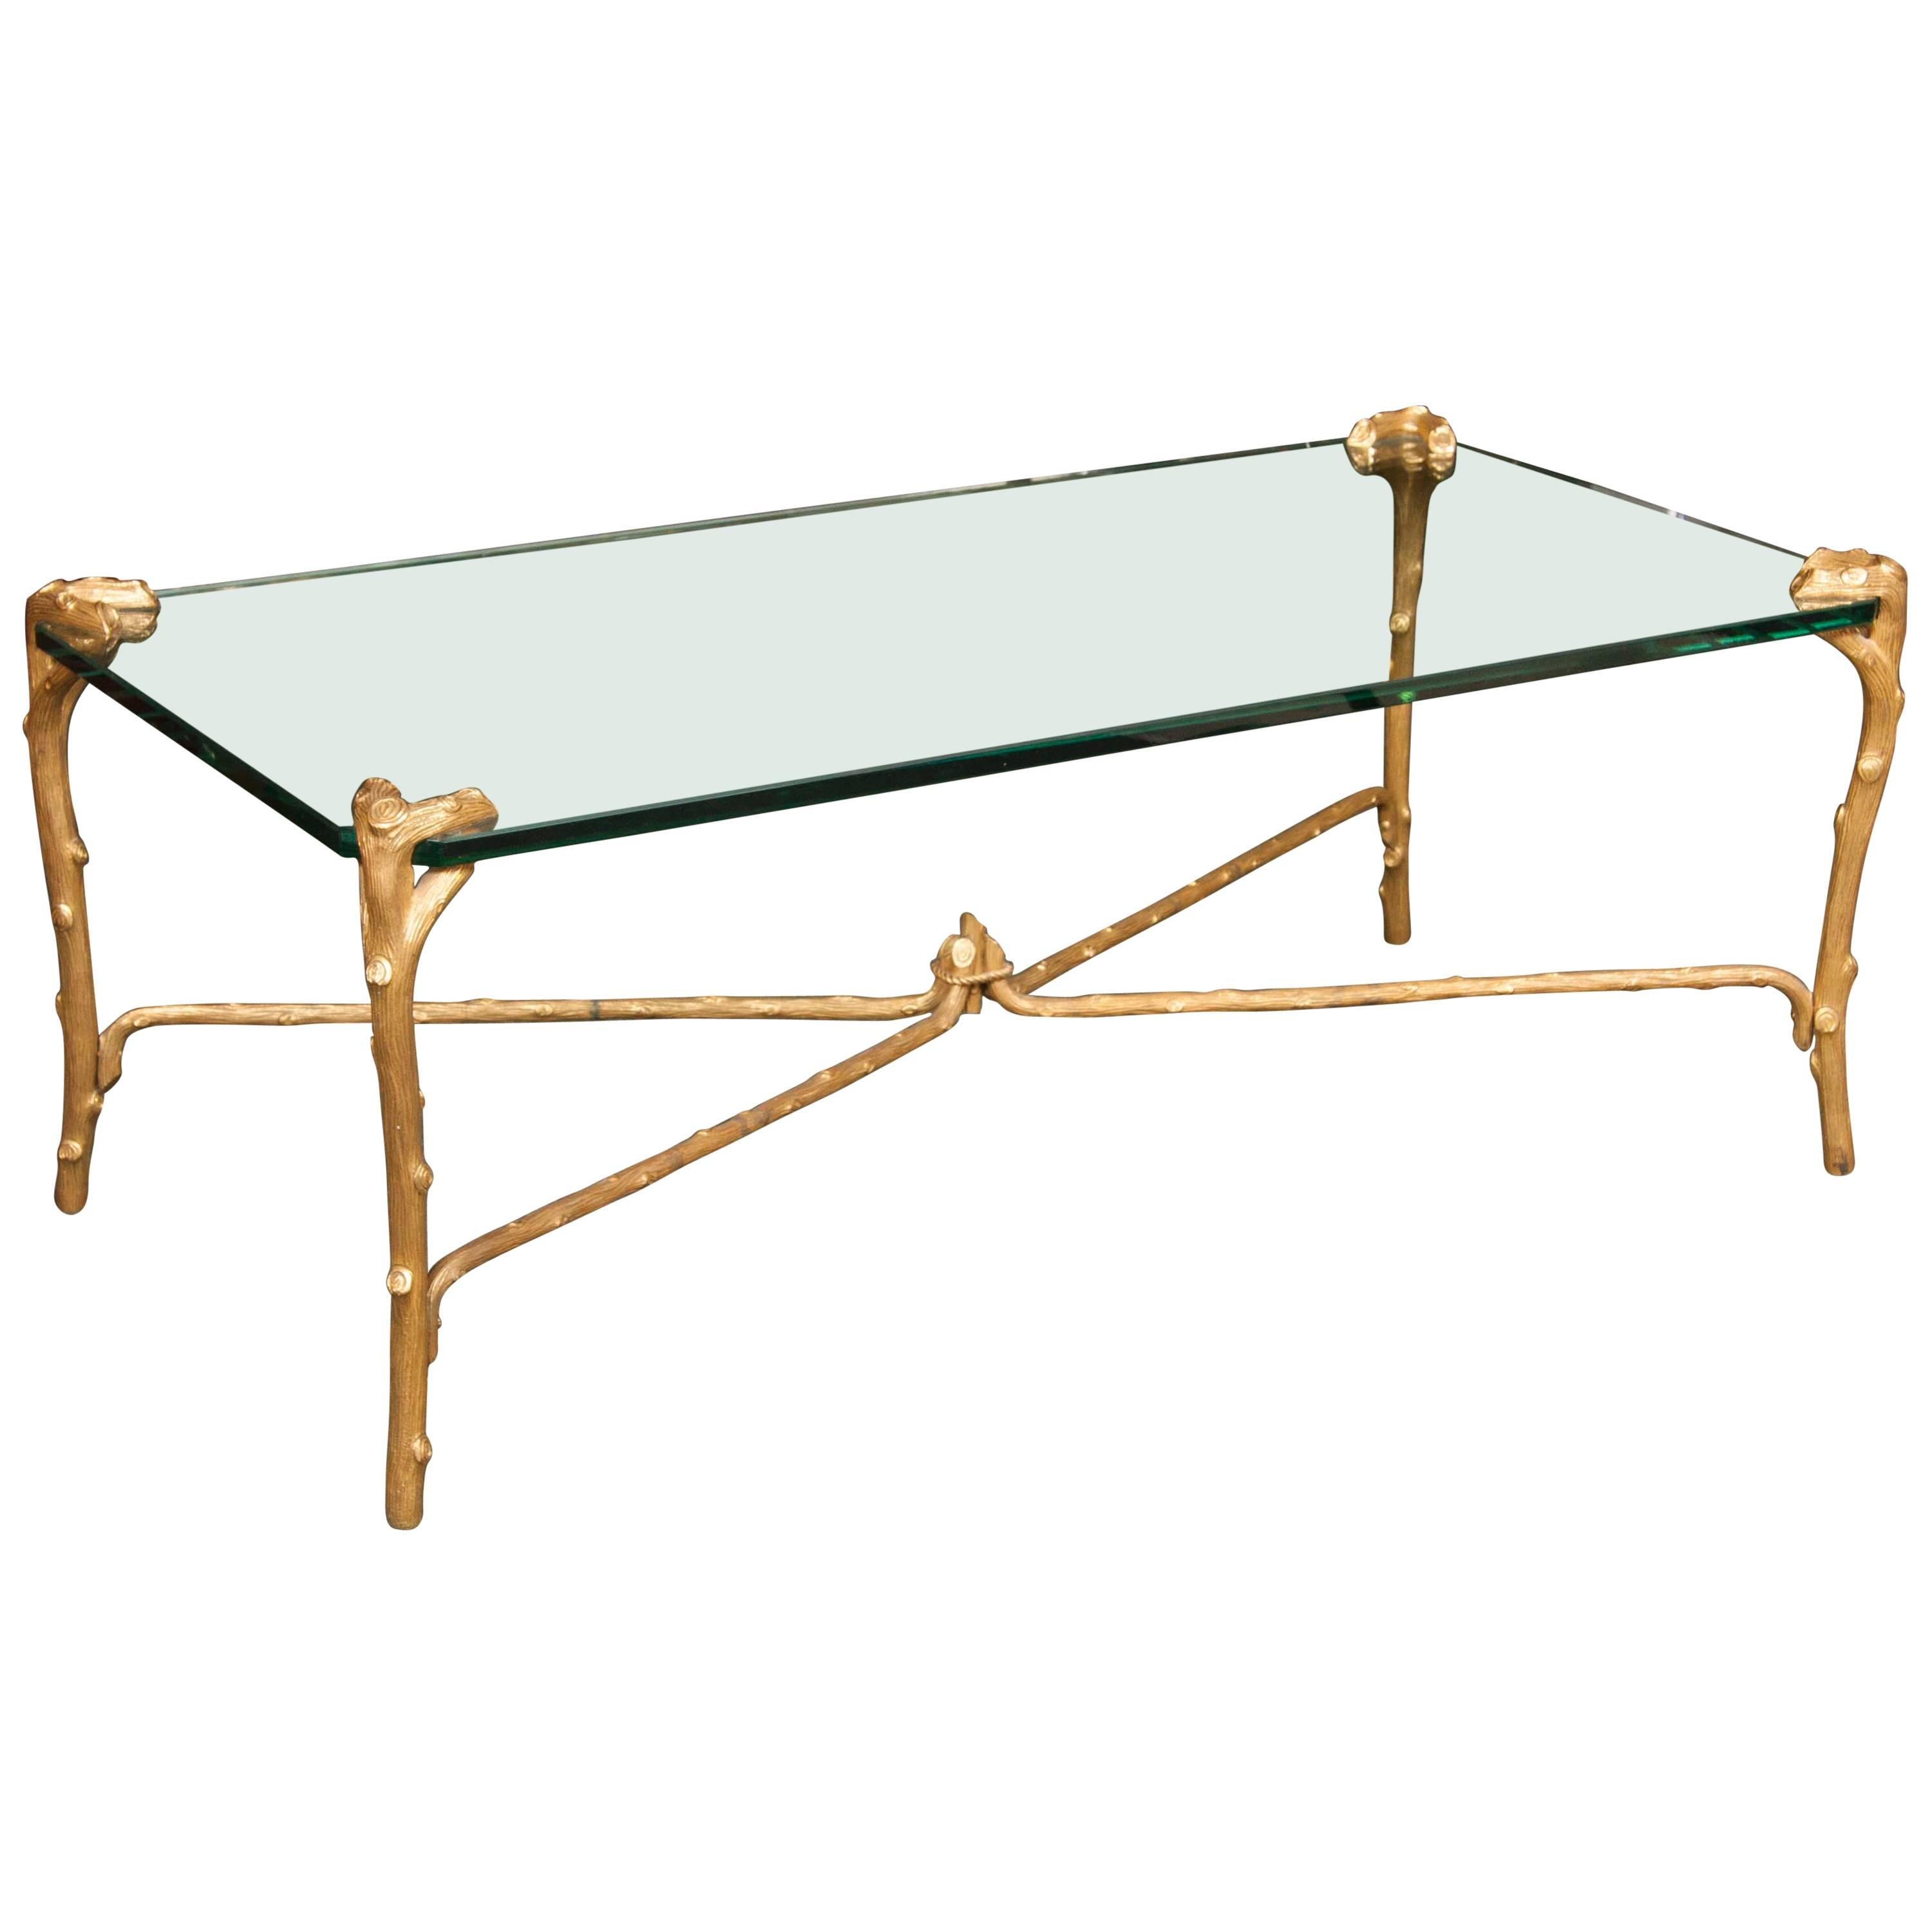 P. E. Guerin Gold-Plated Brass Coffee Table